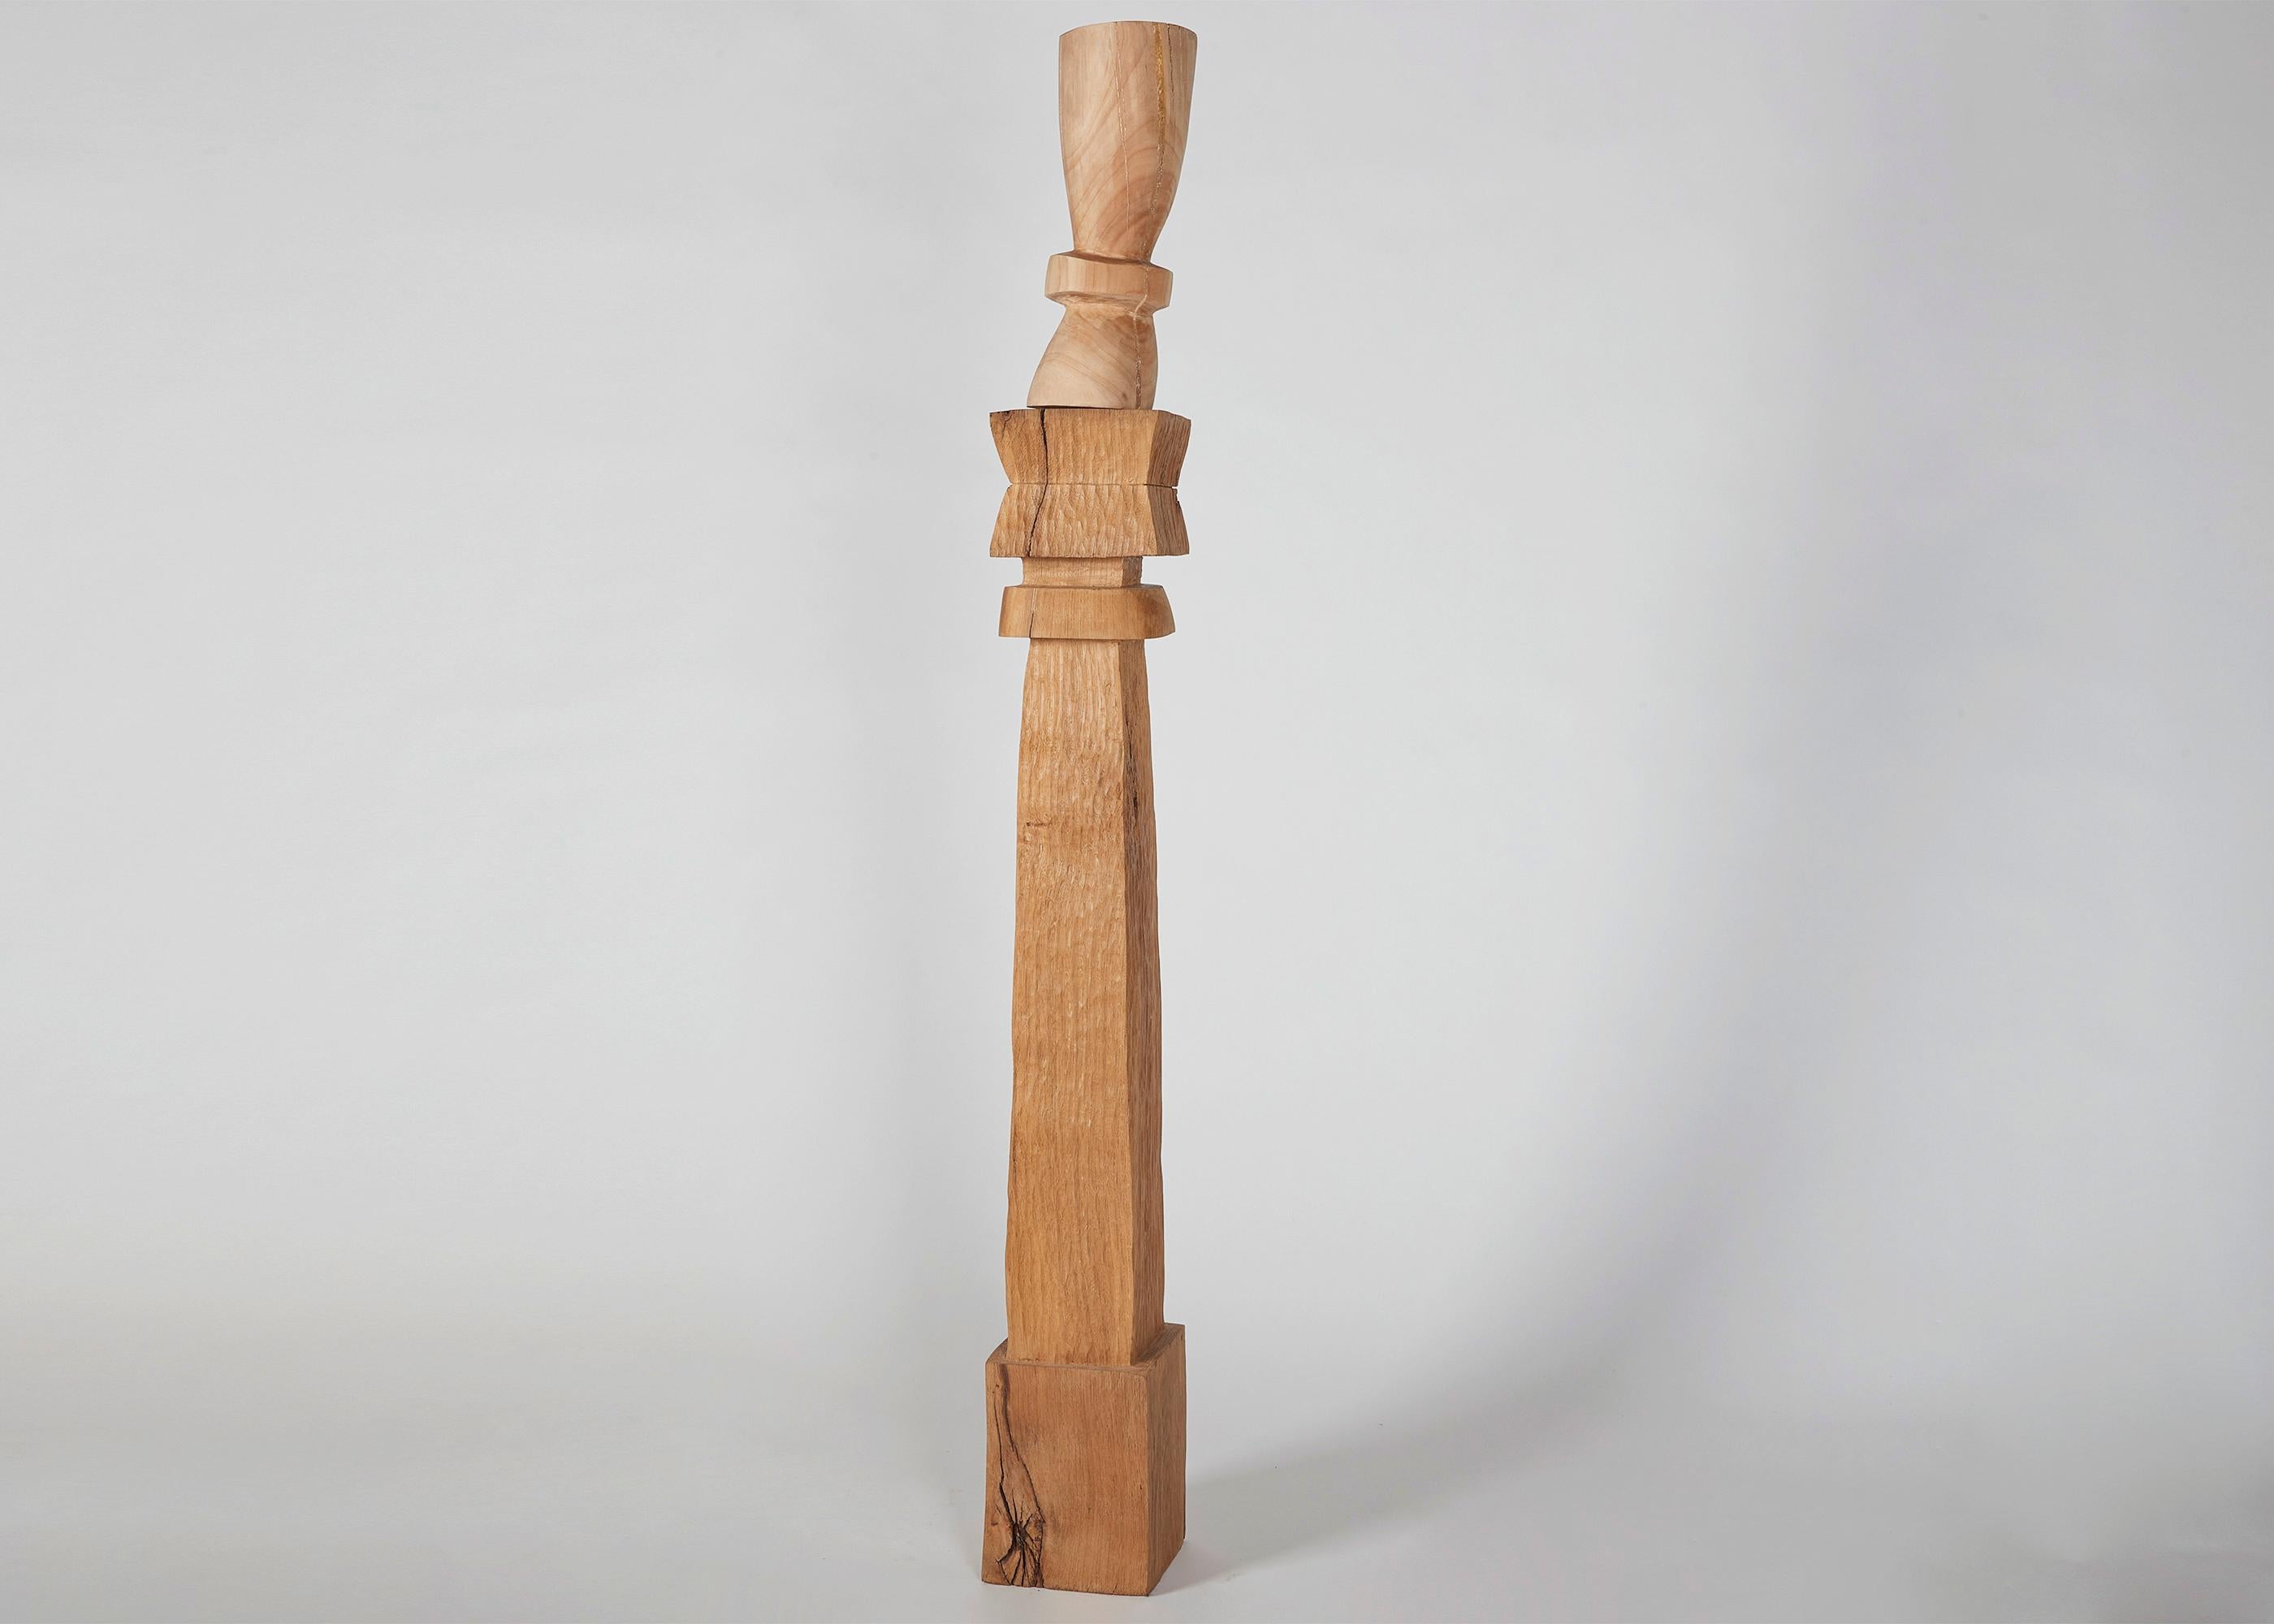 The totems of the French sculptor Franck Evennou possess a playful quality that counterbalances the traditional solemnity of the form. With their rough, splitting surface, they are not merely true in spirit to the wood from which they are carved,